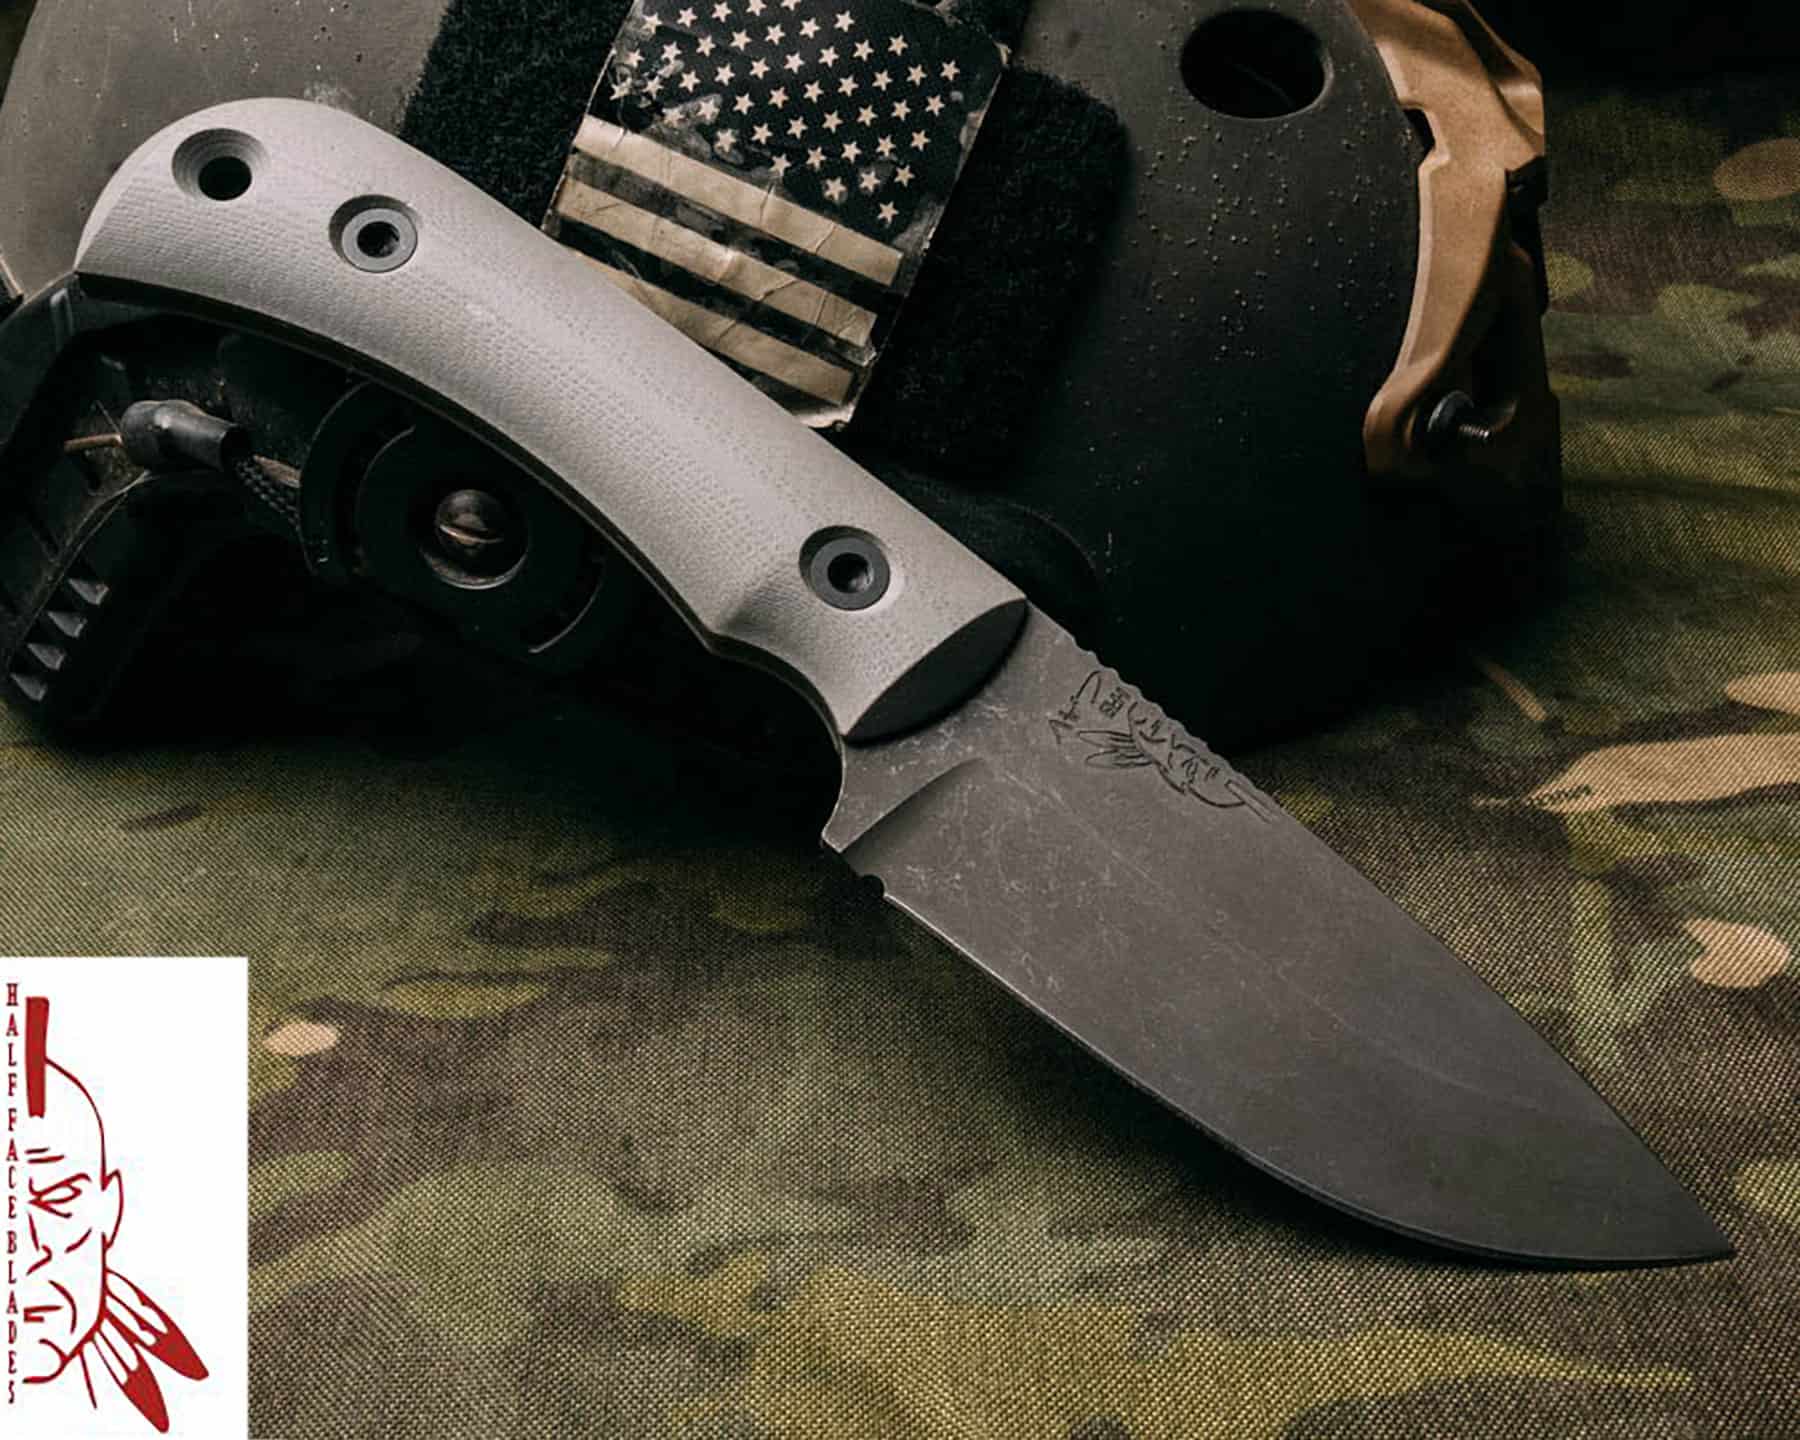 Half Face Blades makes hunting, tactical and survival knives in the US.